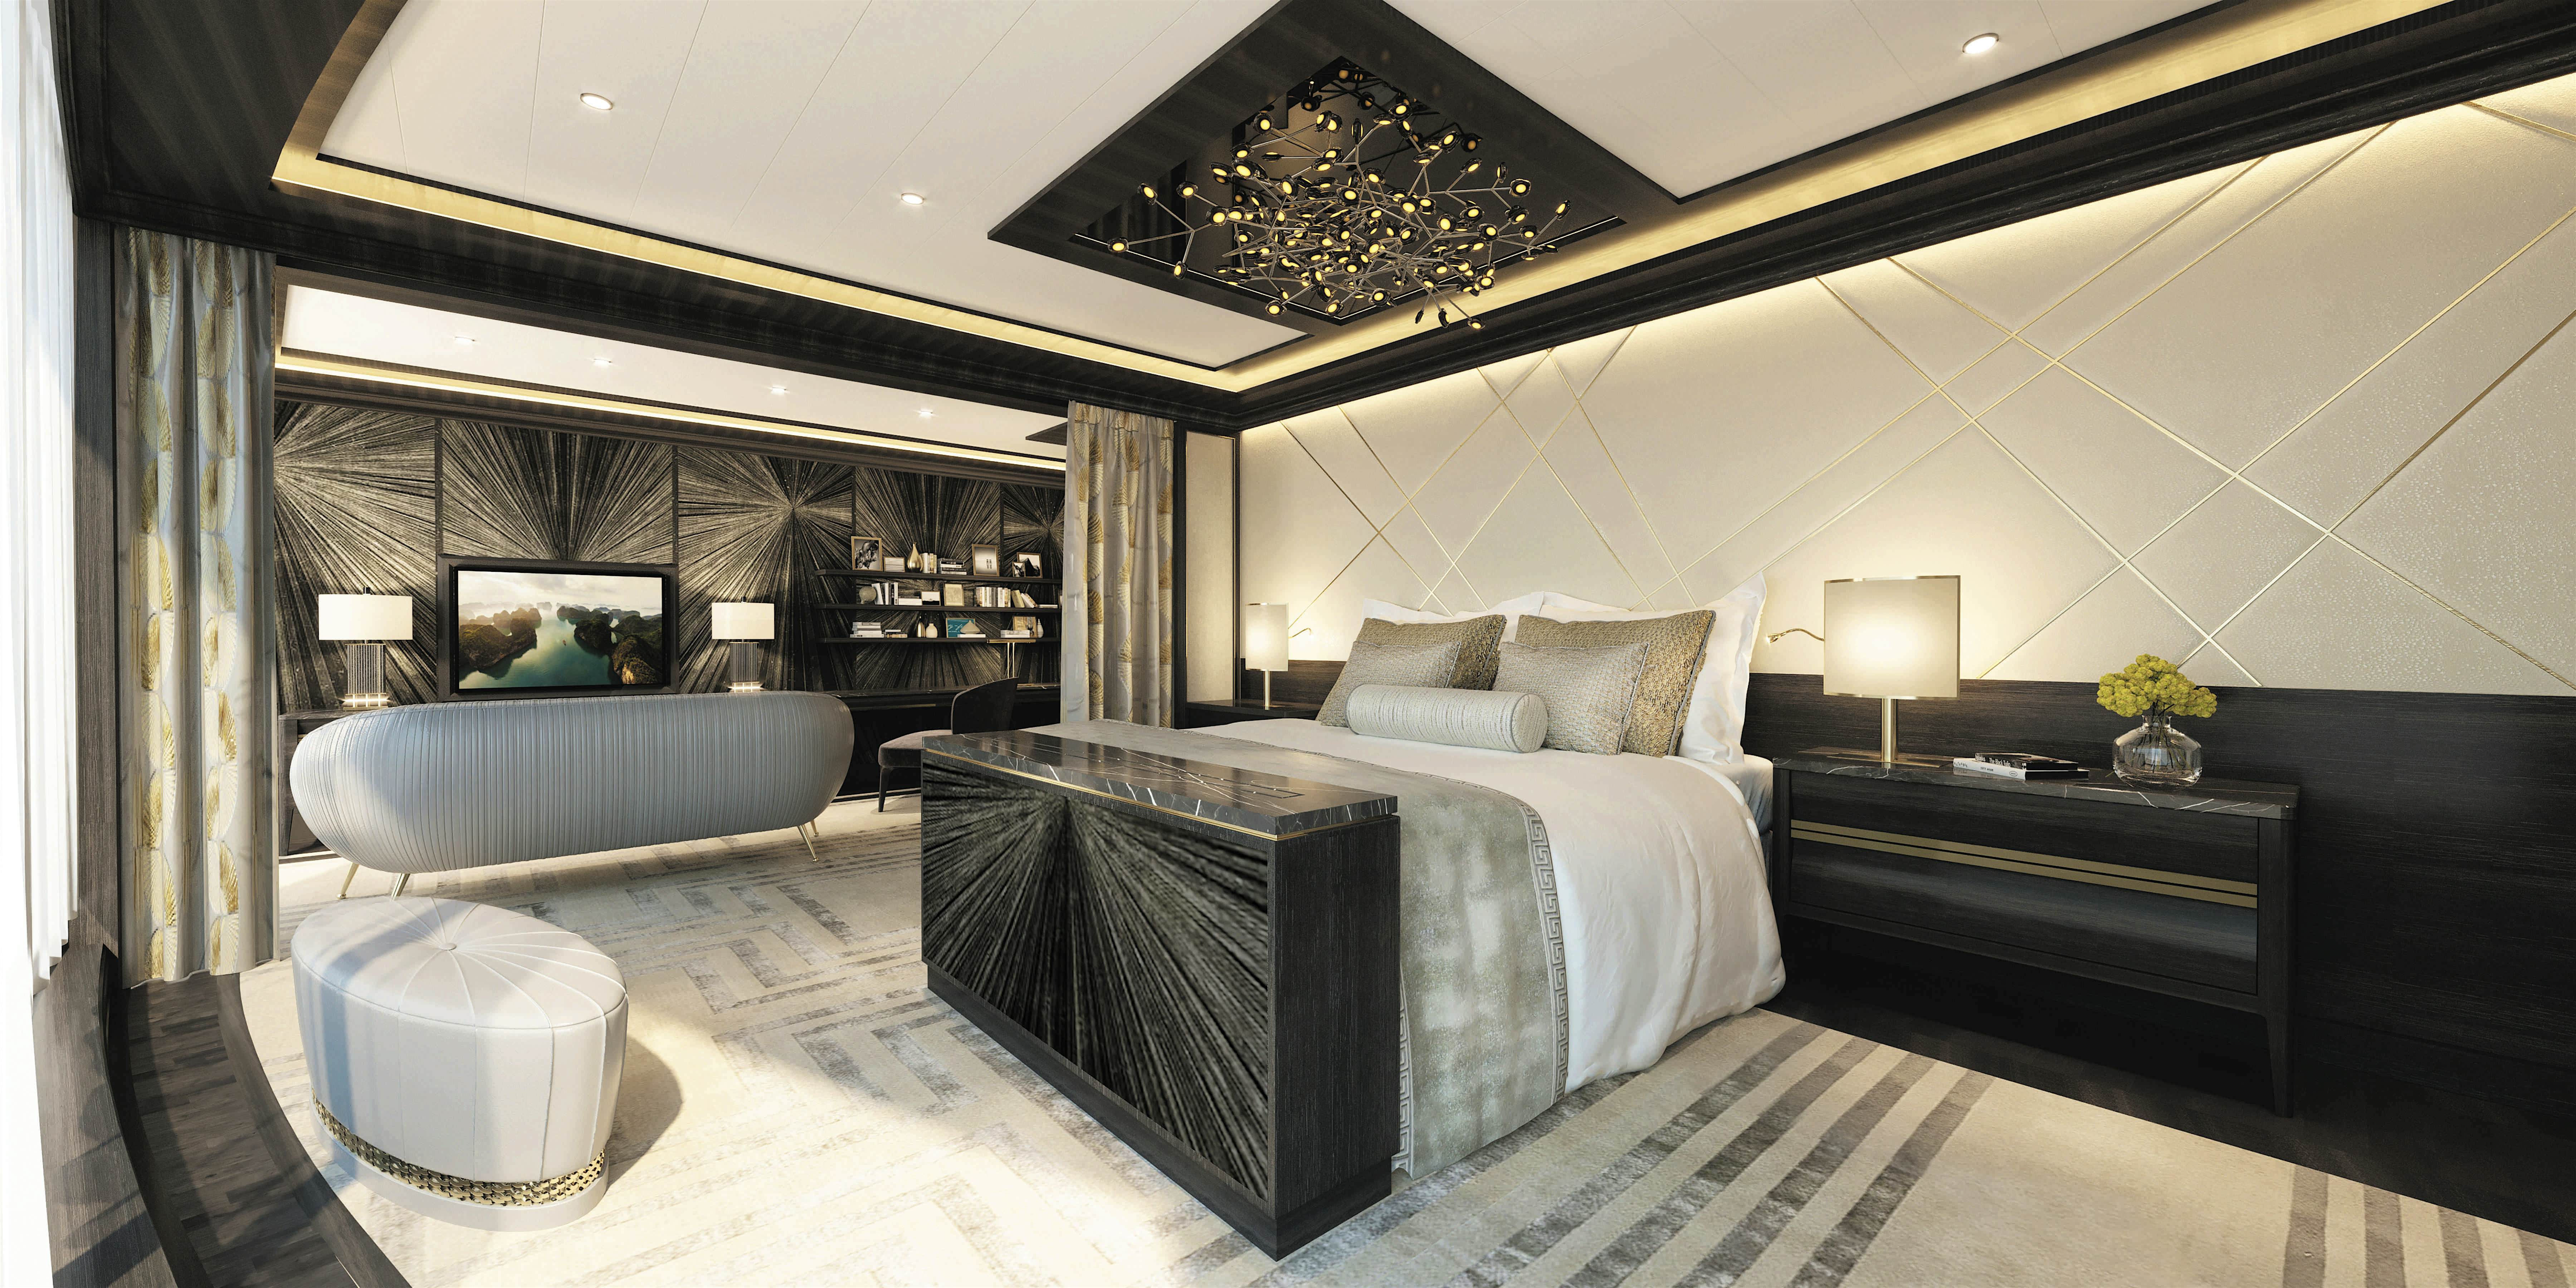 The World S Largest Cruise Suite Features A 200 000 Bed